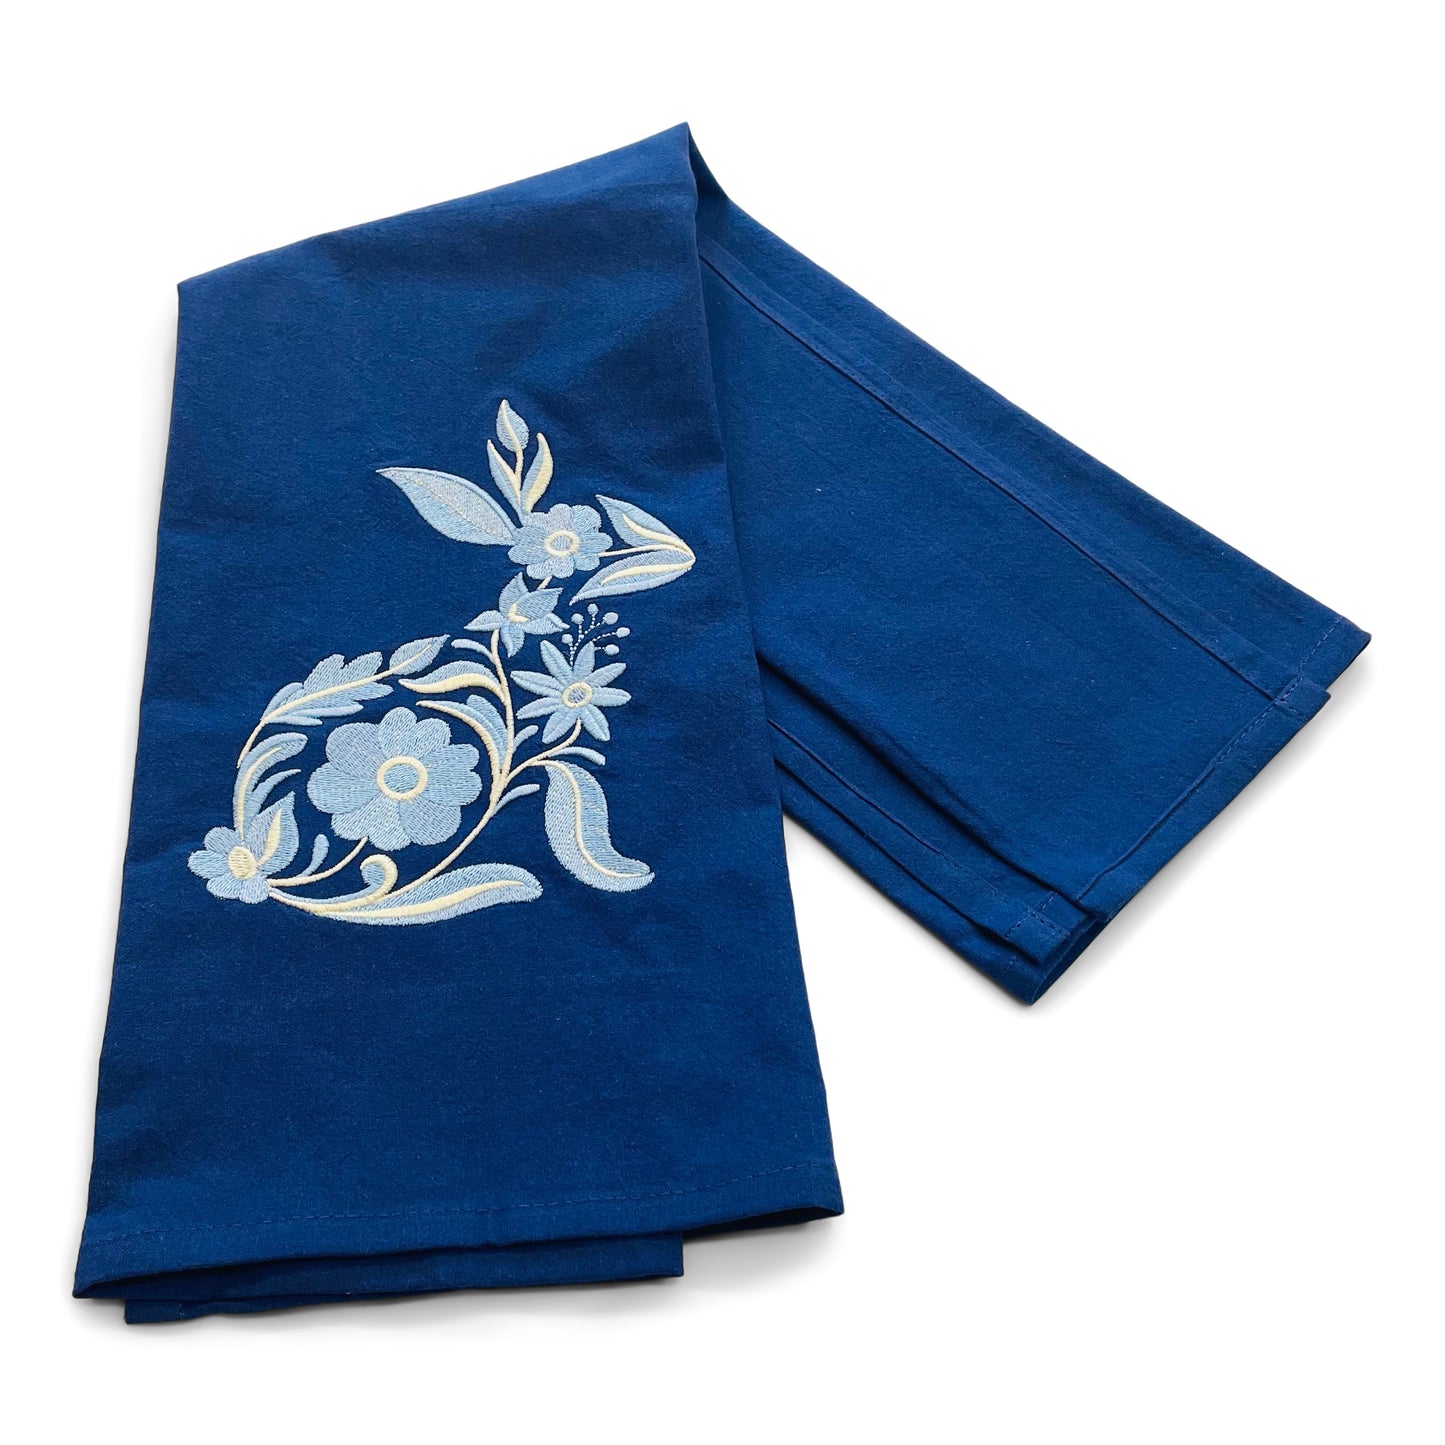 Towel  - Blue Bunny Spring Easter on Navy